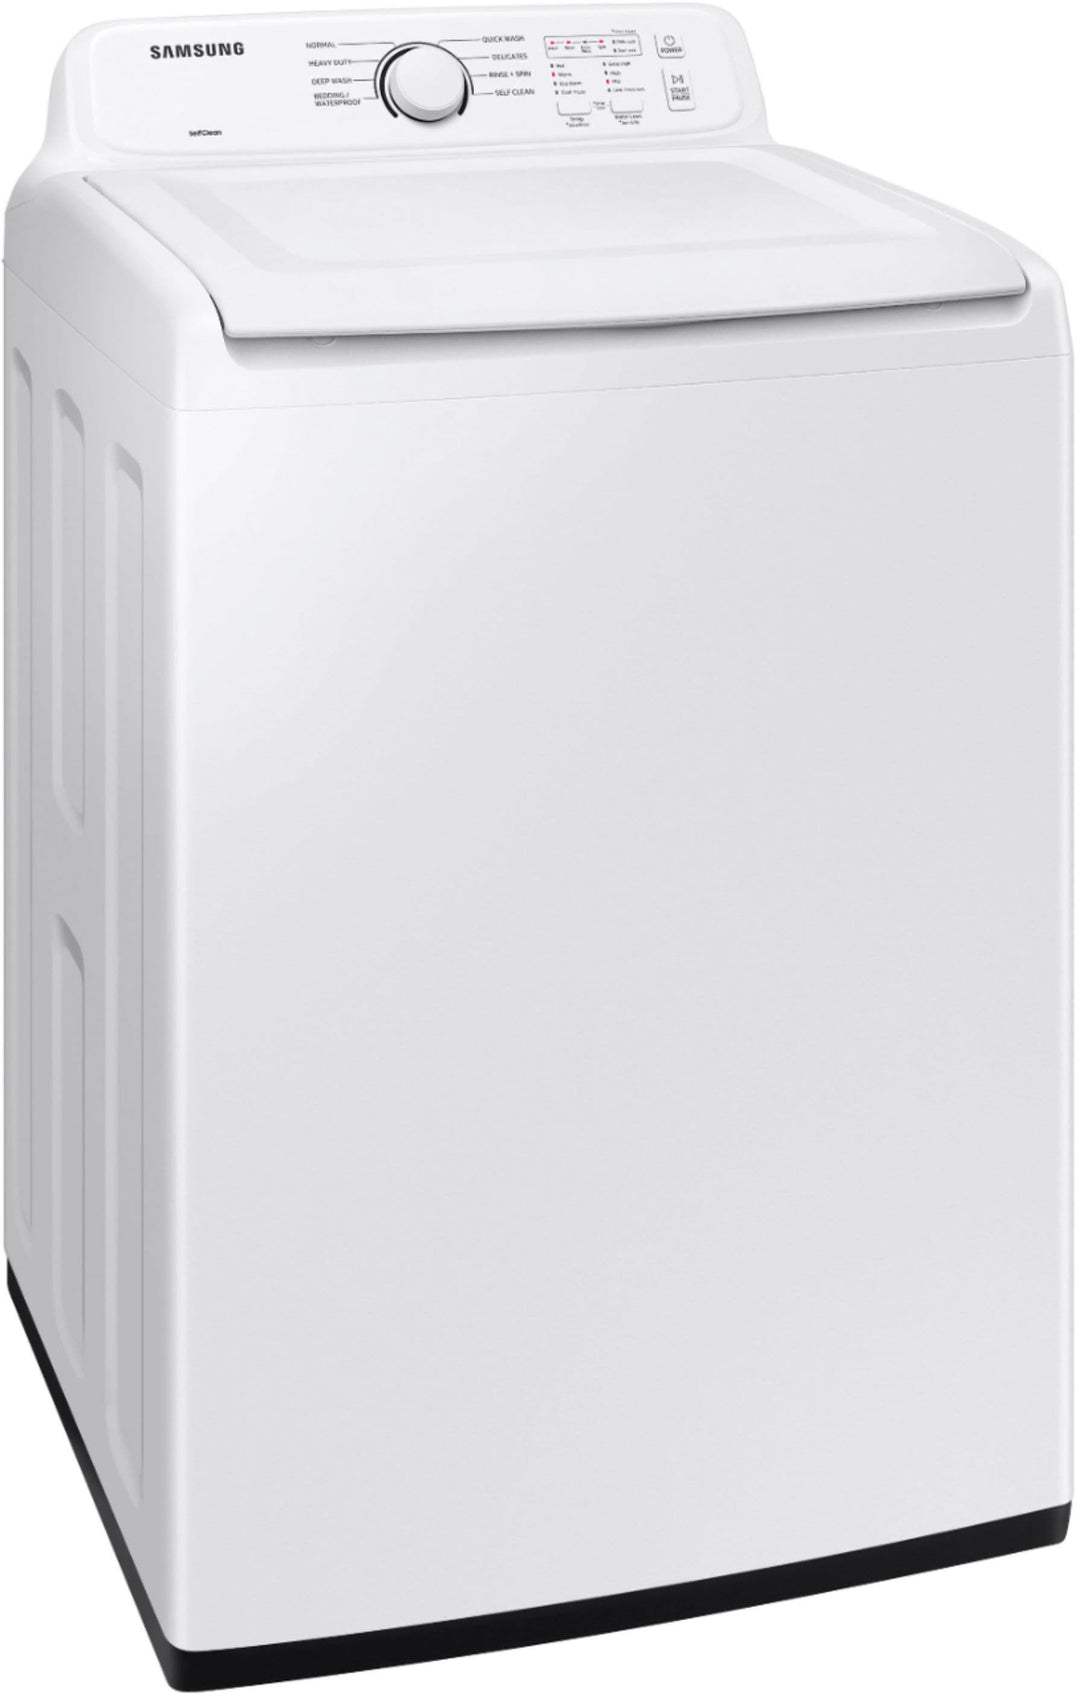 Samsung - 4.0 cu. ft. High-Efficiency Top Load Washer with ActiveWave Agitator and Soft-Close Lid - White_4